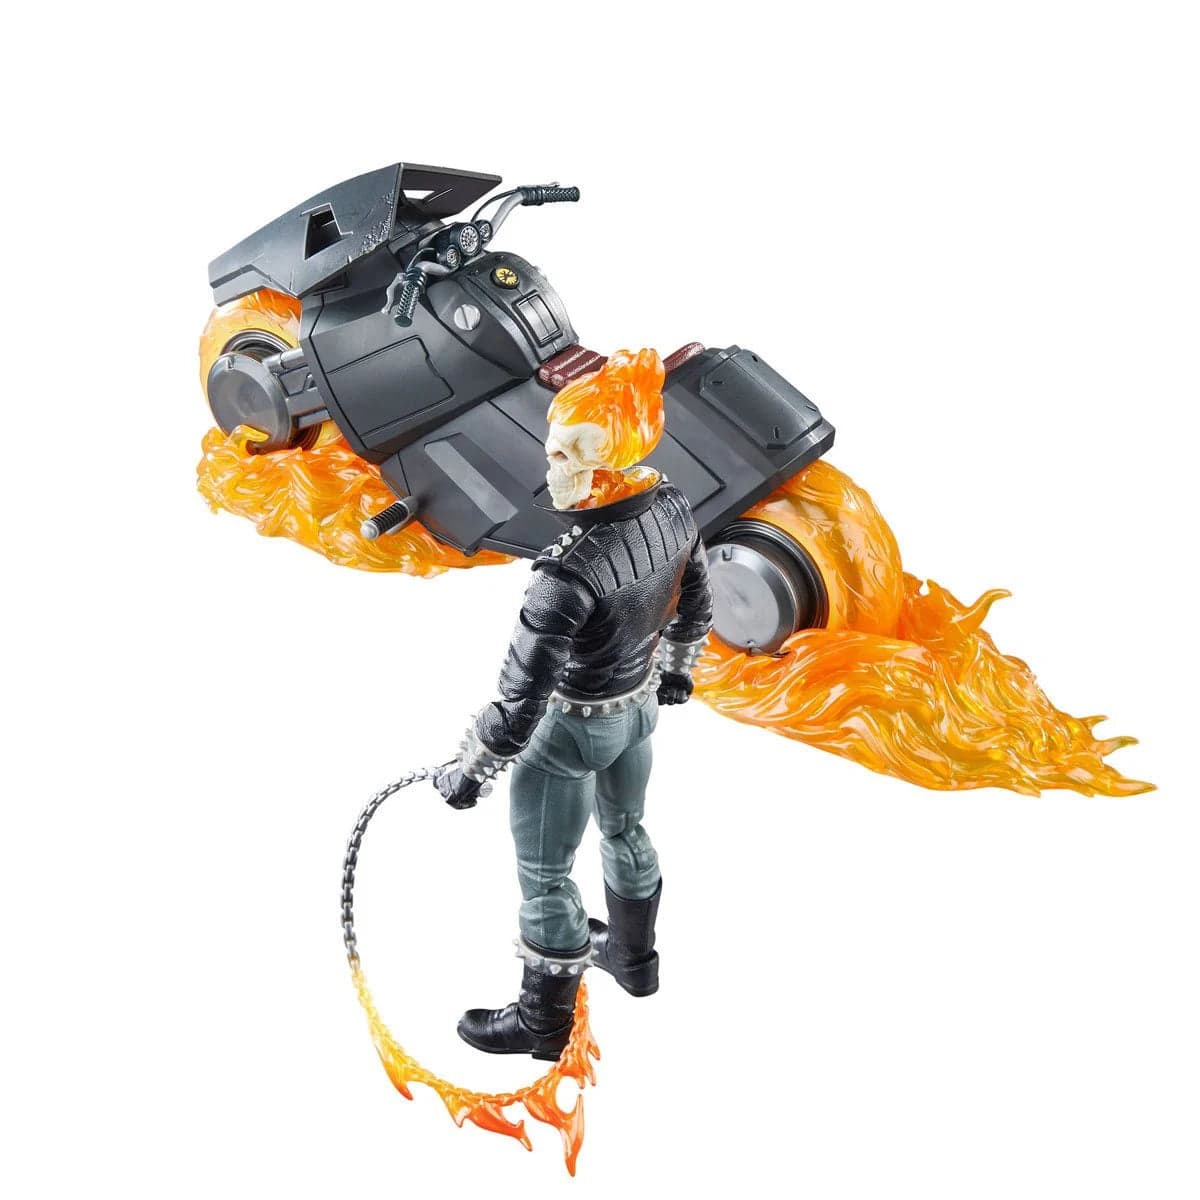 Marvel-Legends-Series-Ghost-Rider-_Danny-Ketch_-with-Motorcycle-Action-Figure-Over-Head-Pose